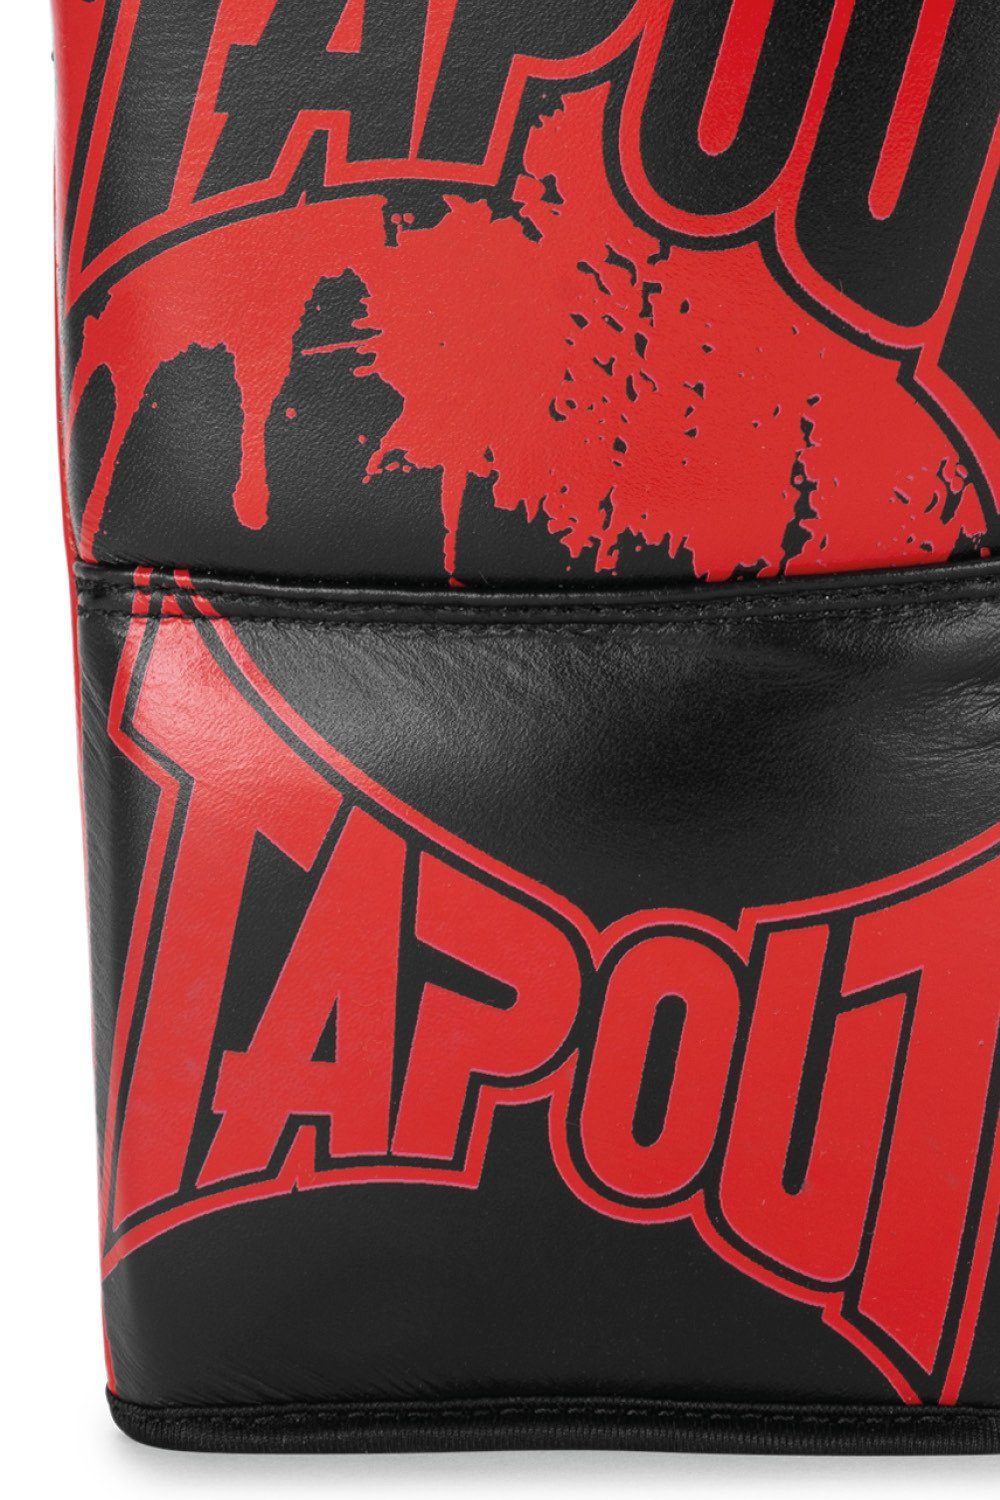 ANGELUS Boxhandschuhe TAPOUT Black/Red